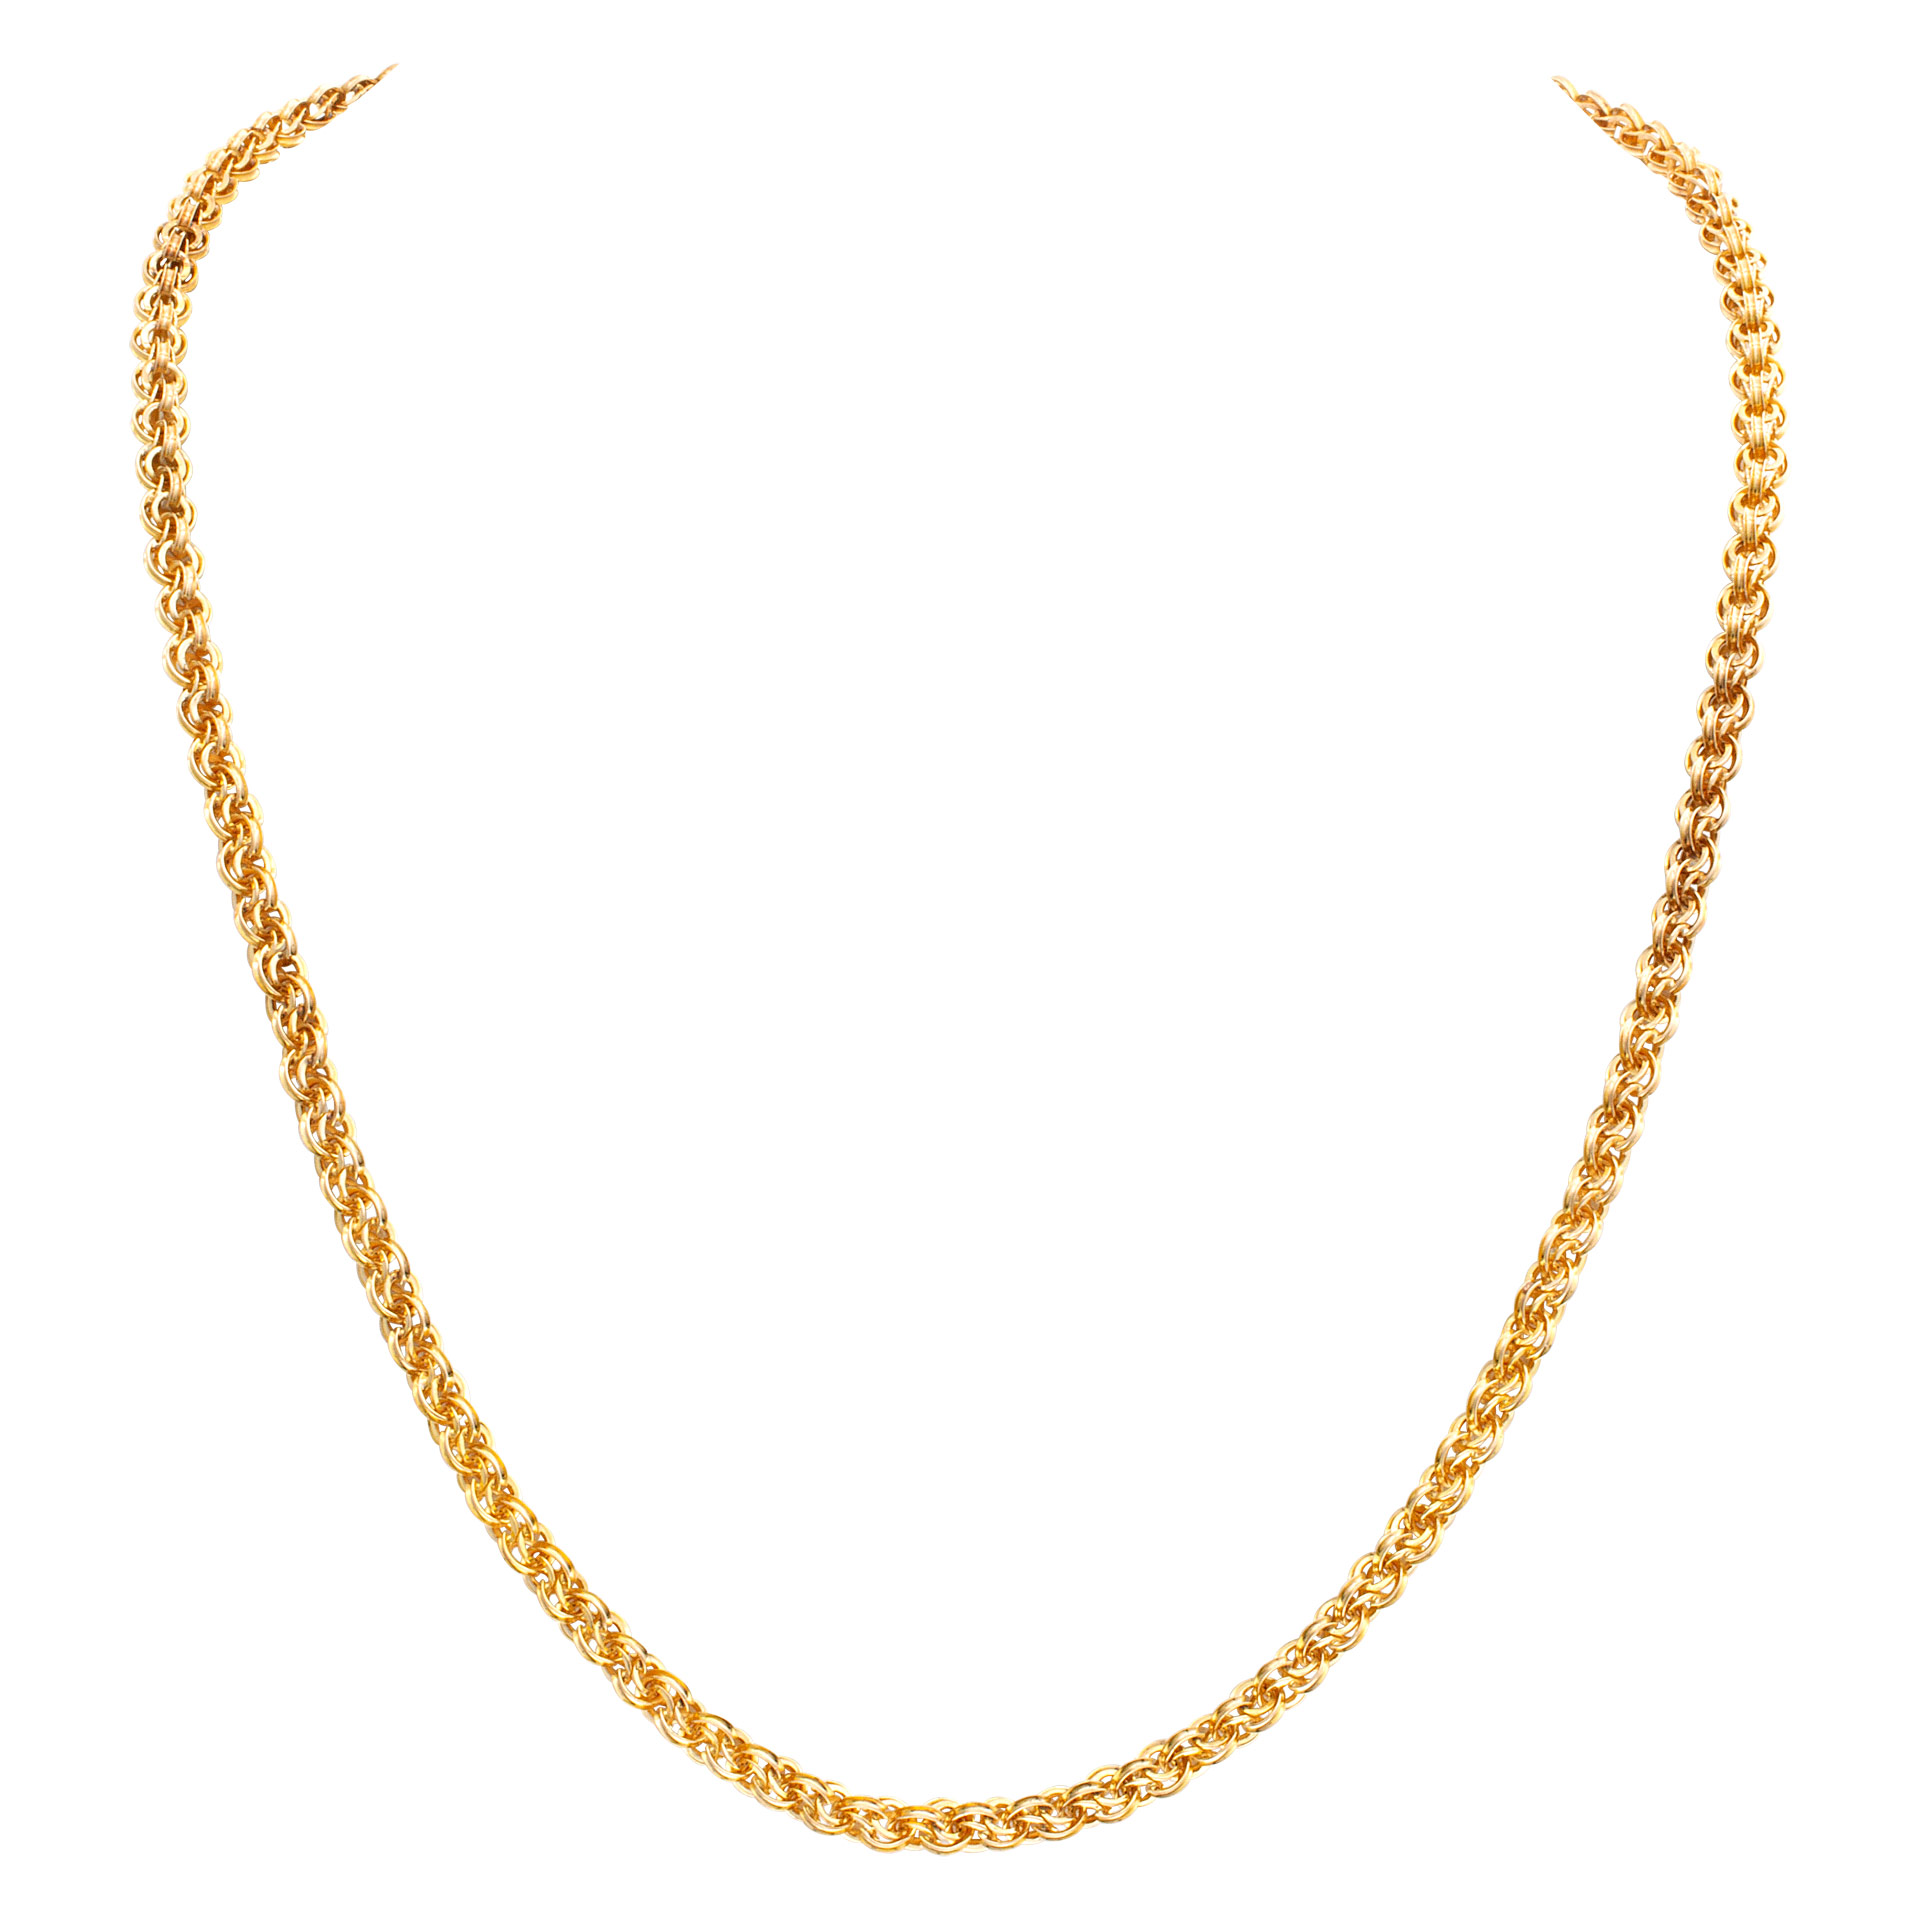 Intricate 14k yellow gold link necklace. Width: 4.8mm. Length: 20 inches. image 1